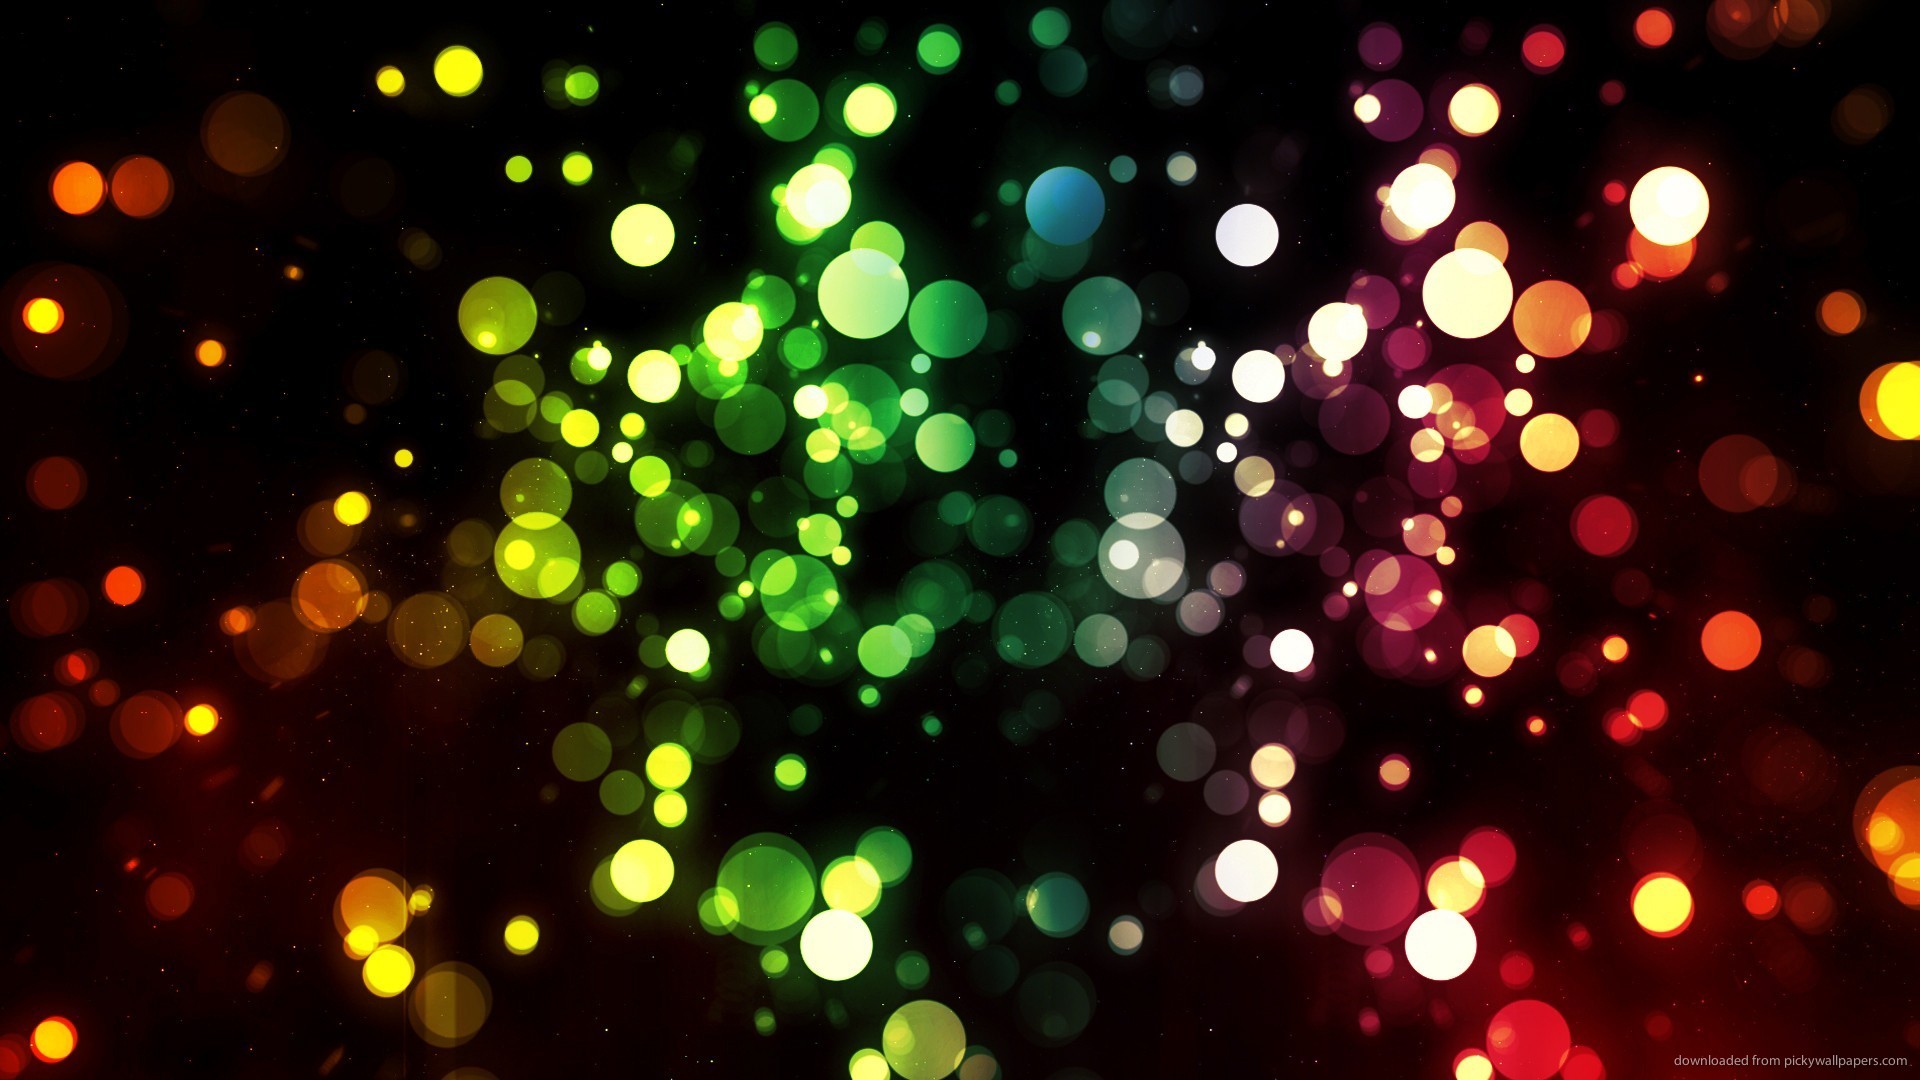 sparkly background twitter wallpaper abstract 1920x1080 1920x1080